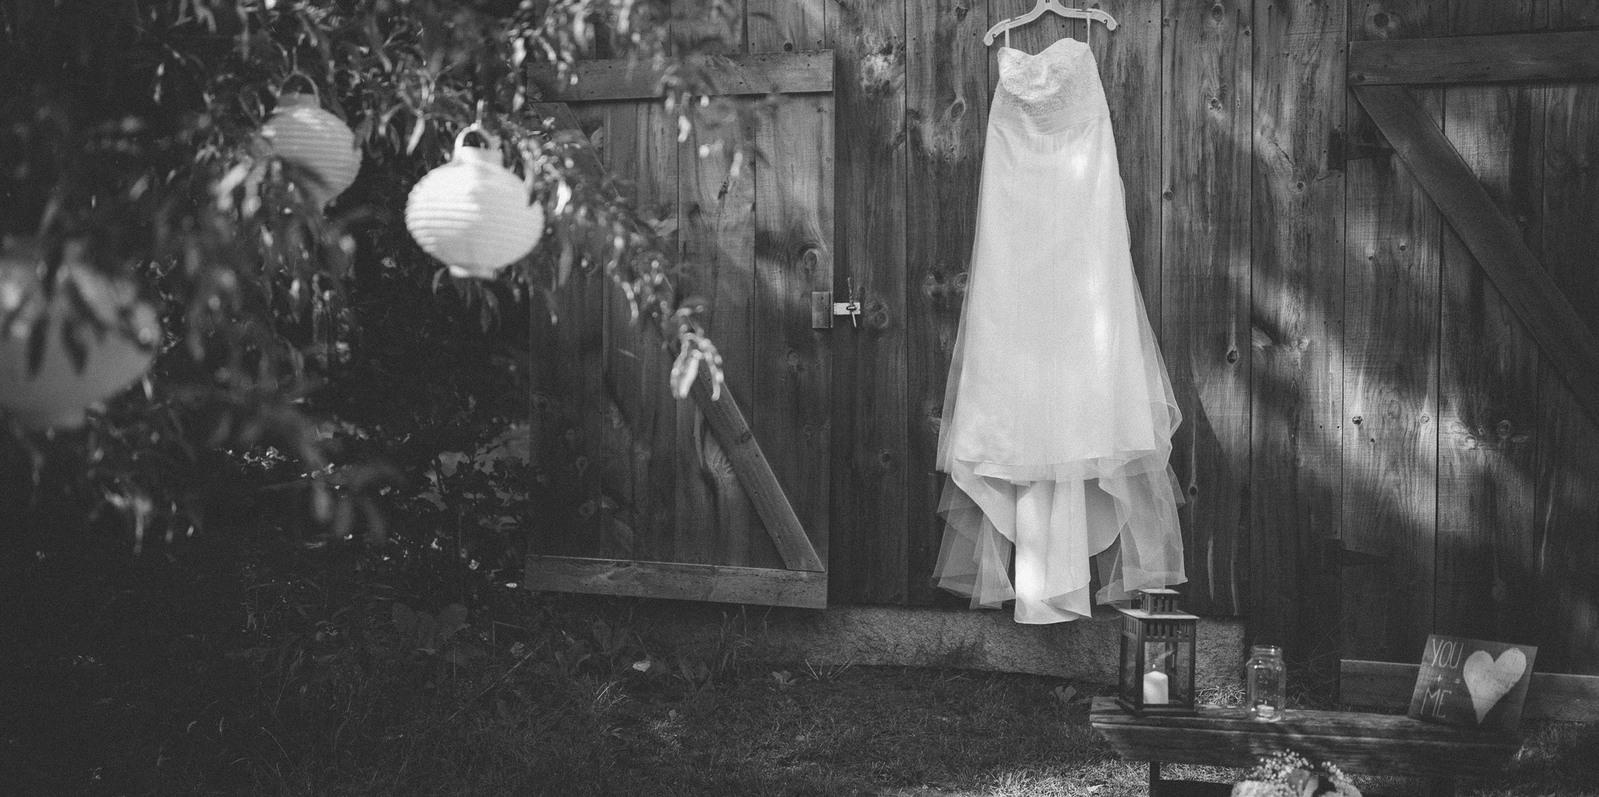 Boho wedding dress and other wedding decorations hanging on a barn wall